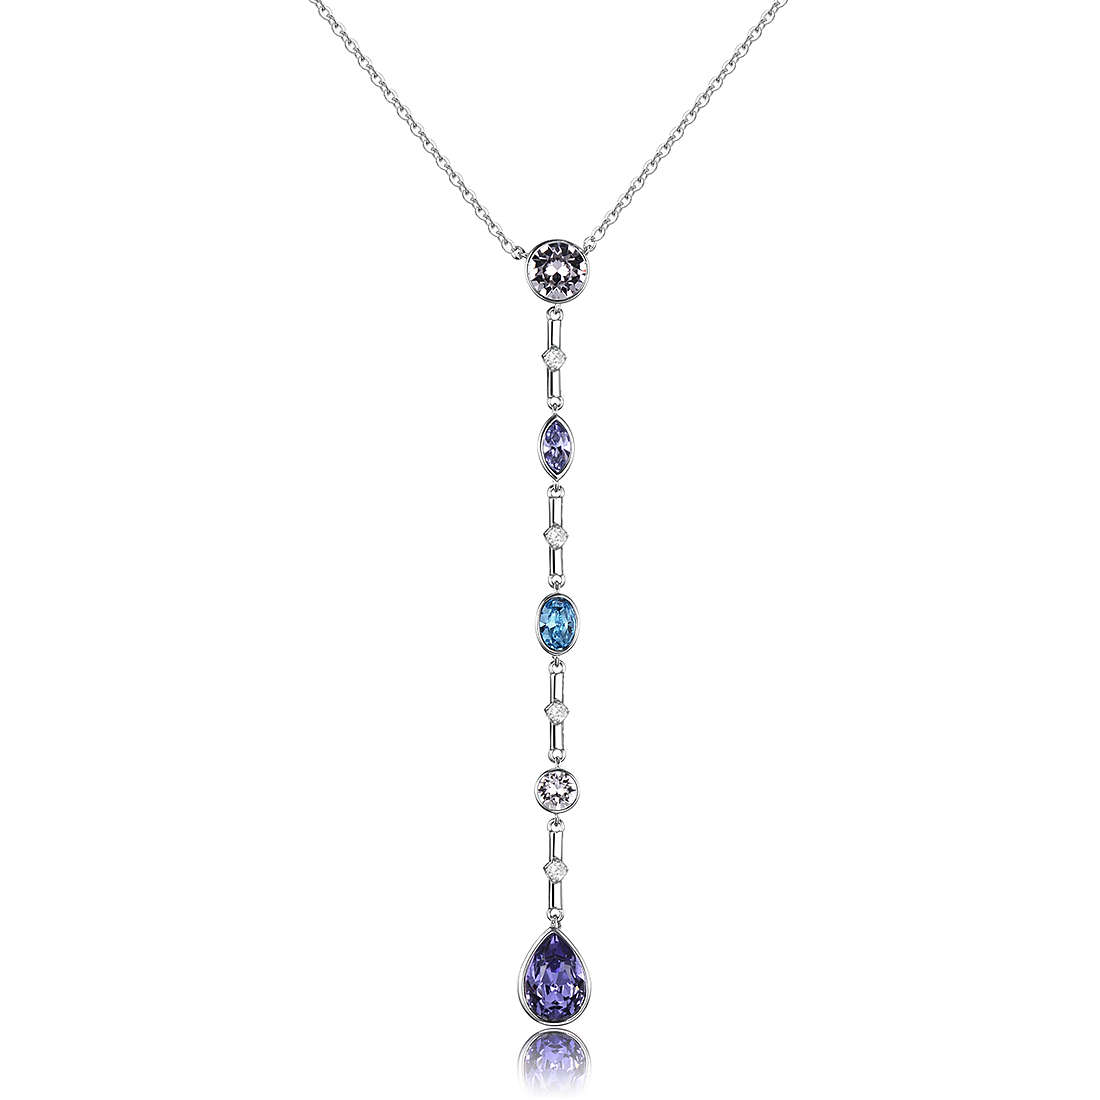 BROSWAY AFFINITY WOMAN NECKLACE SILVER WITH SWAROVSKI CRYSTALS - Sunlab ...